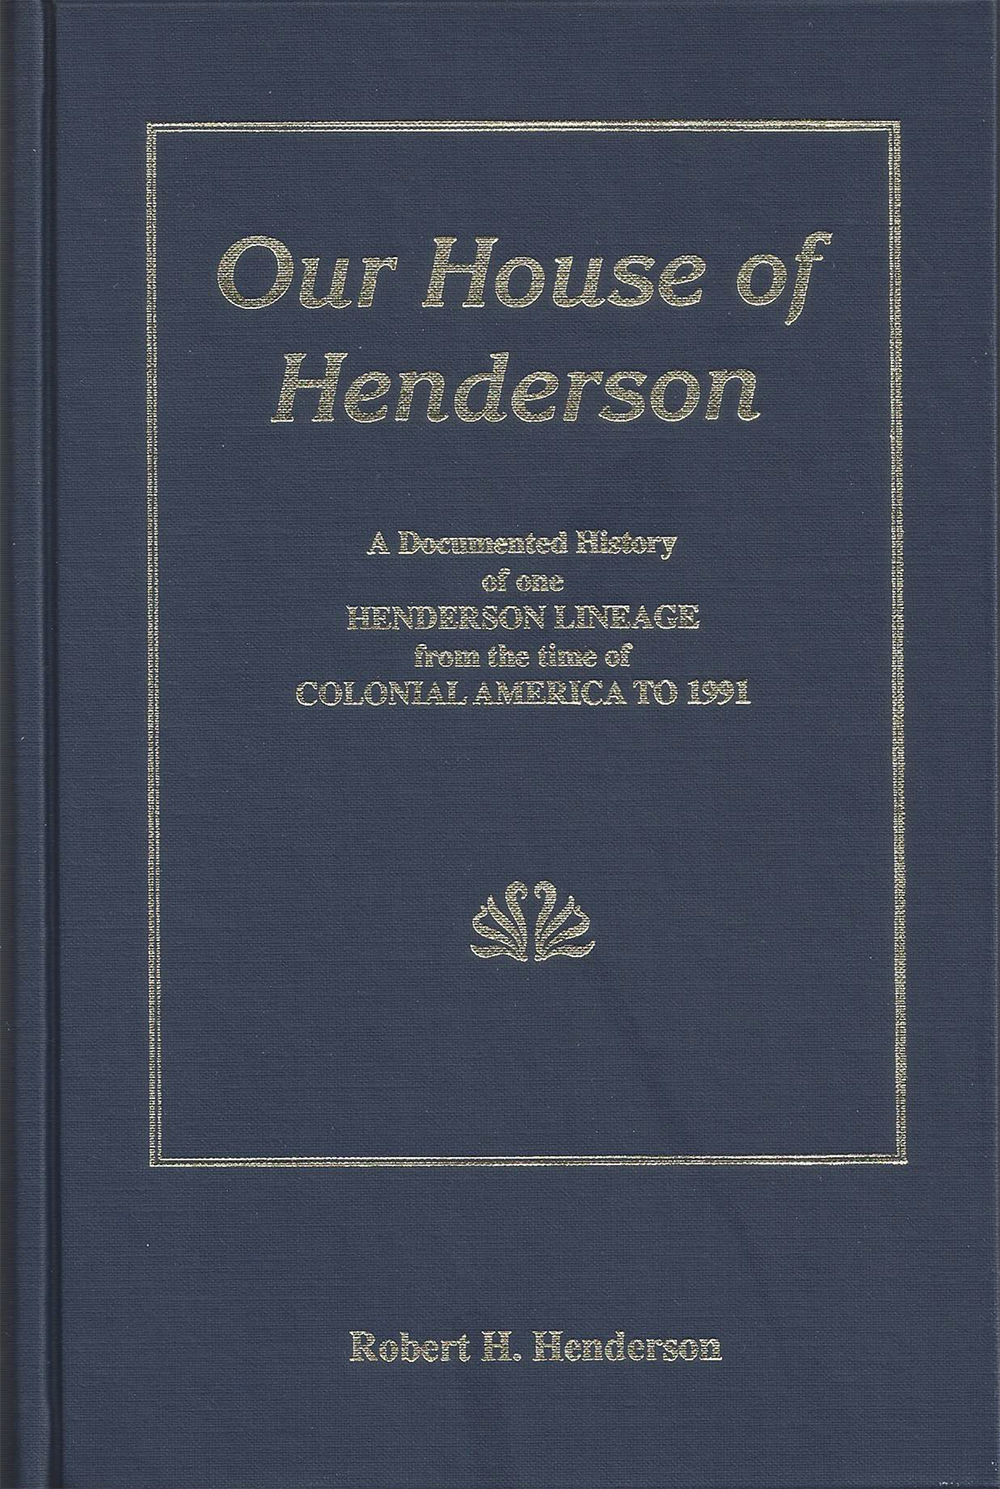 Our House of Henderson